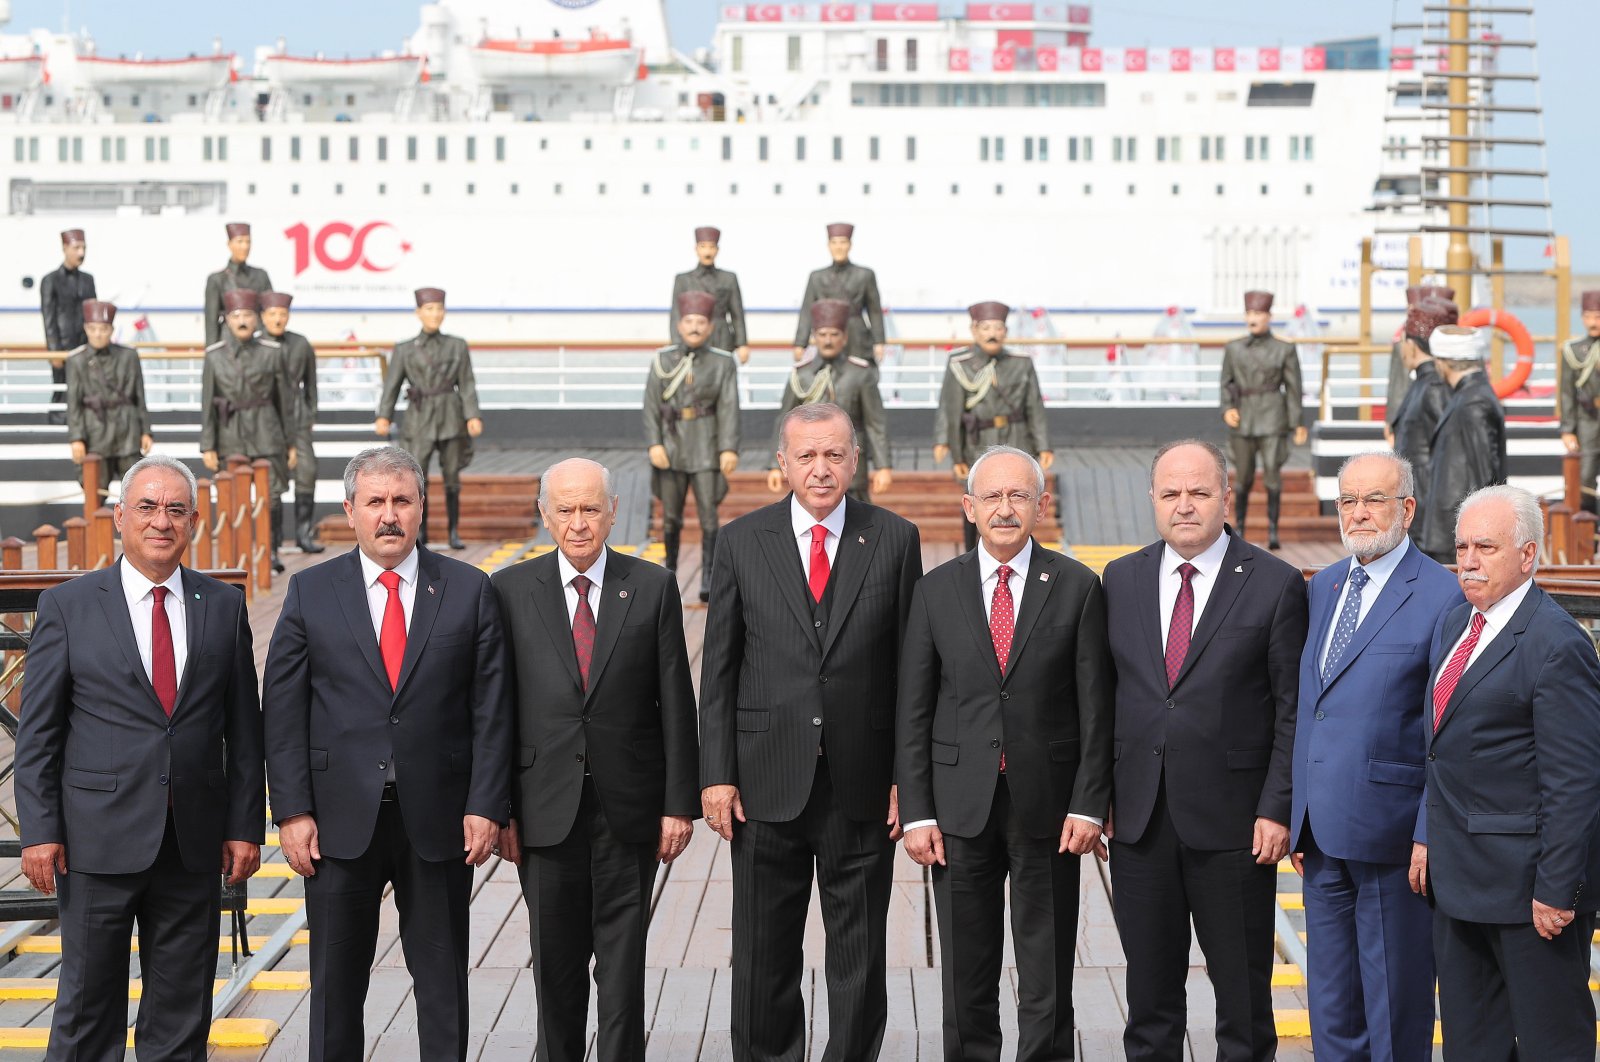 President Recep Tayyip Erdoğan (C) poses with leaders of political parties in Turkey in Samsun province on May 19, 2020. (Sabah File Photo)